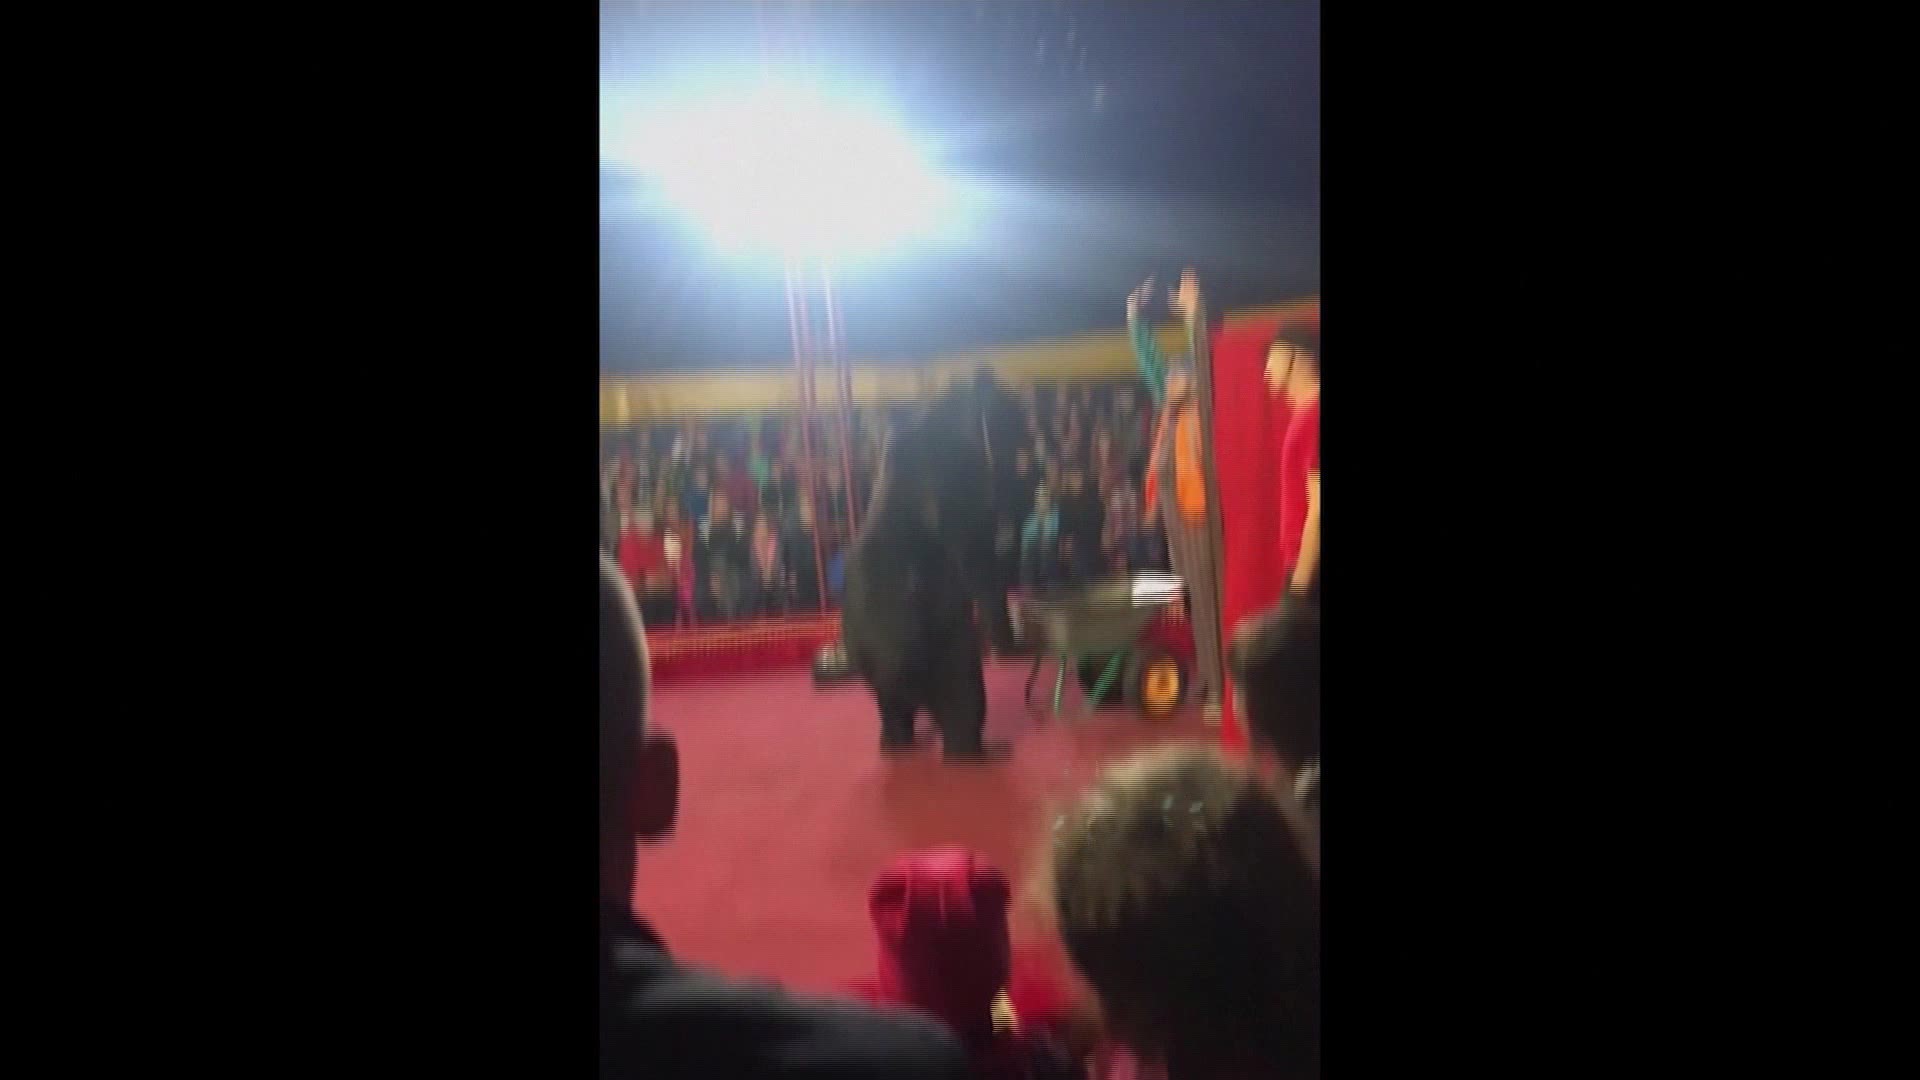 Officials have opened a criminal investigation after a circus bear attacked and injured its trainer during a performance in northern Russia.